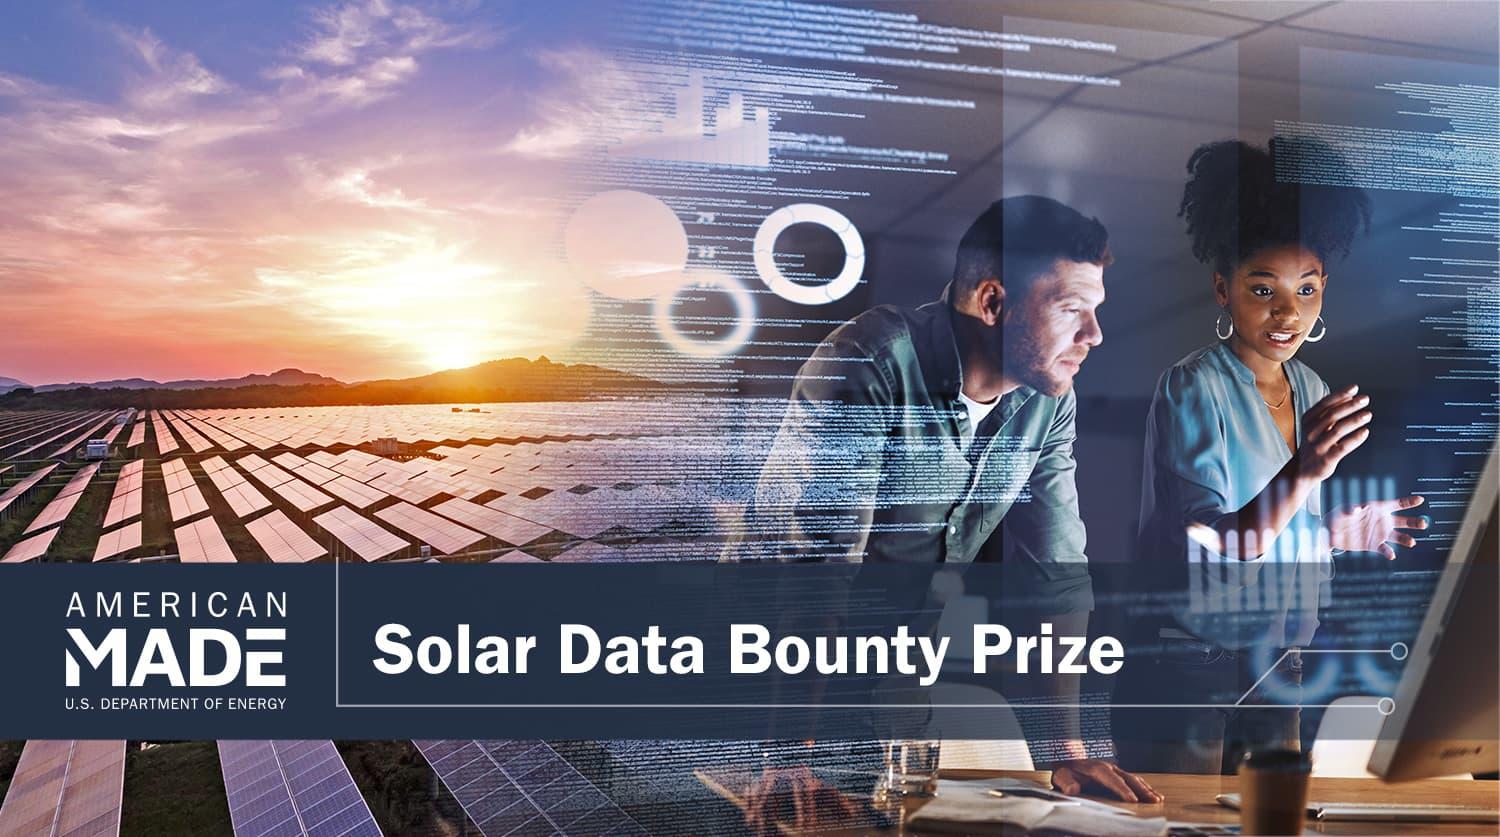 solar panels in a field and people looking at a computer. Solar Data Bounty Prize